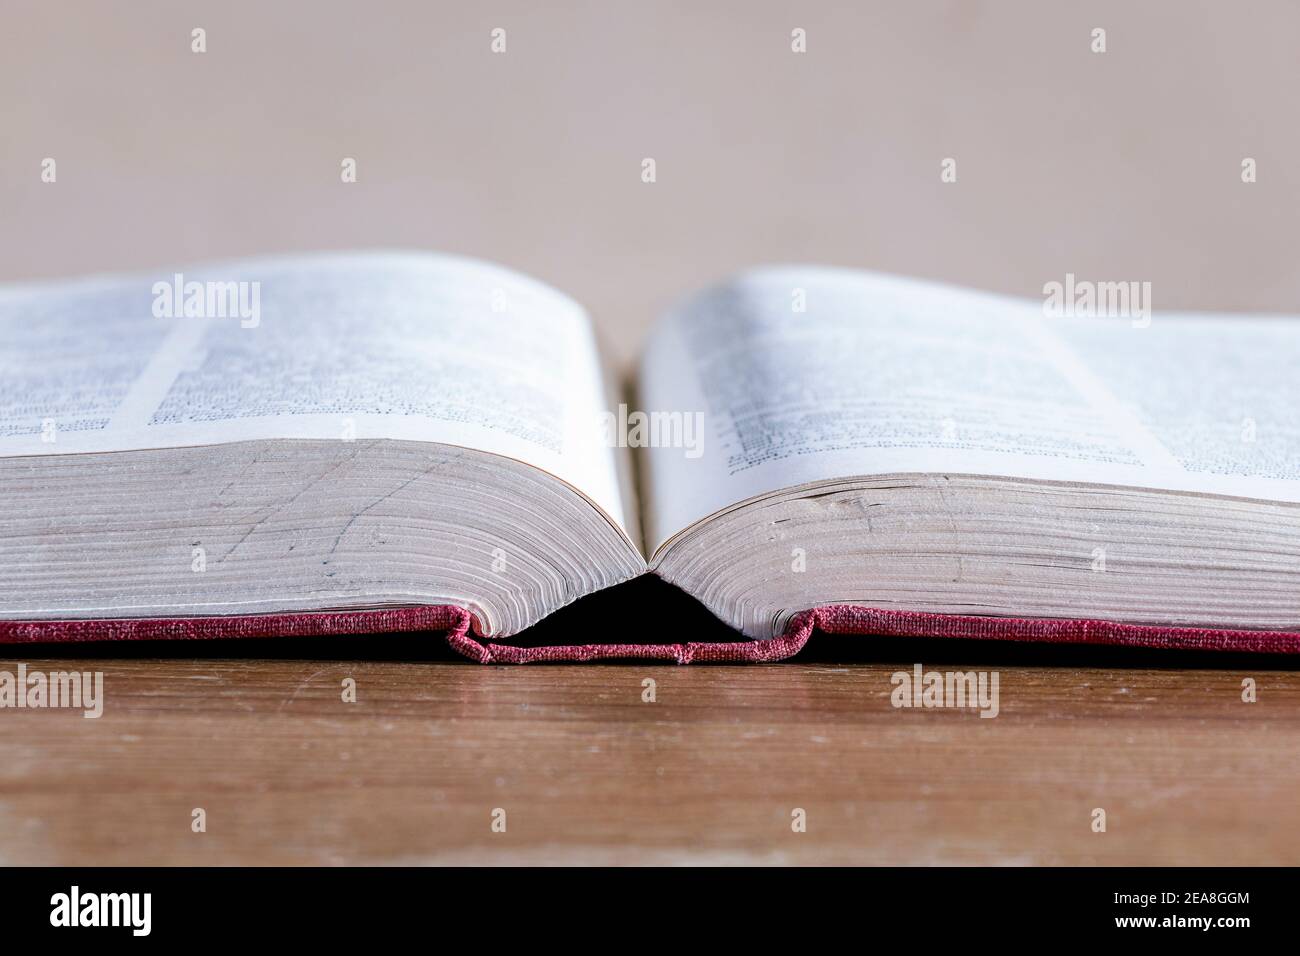 Close-up of an open hardback reference book on an old wooden table Stock Photo